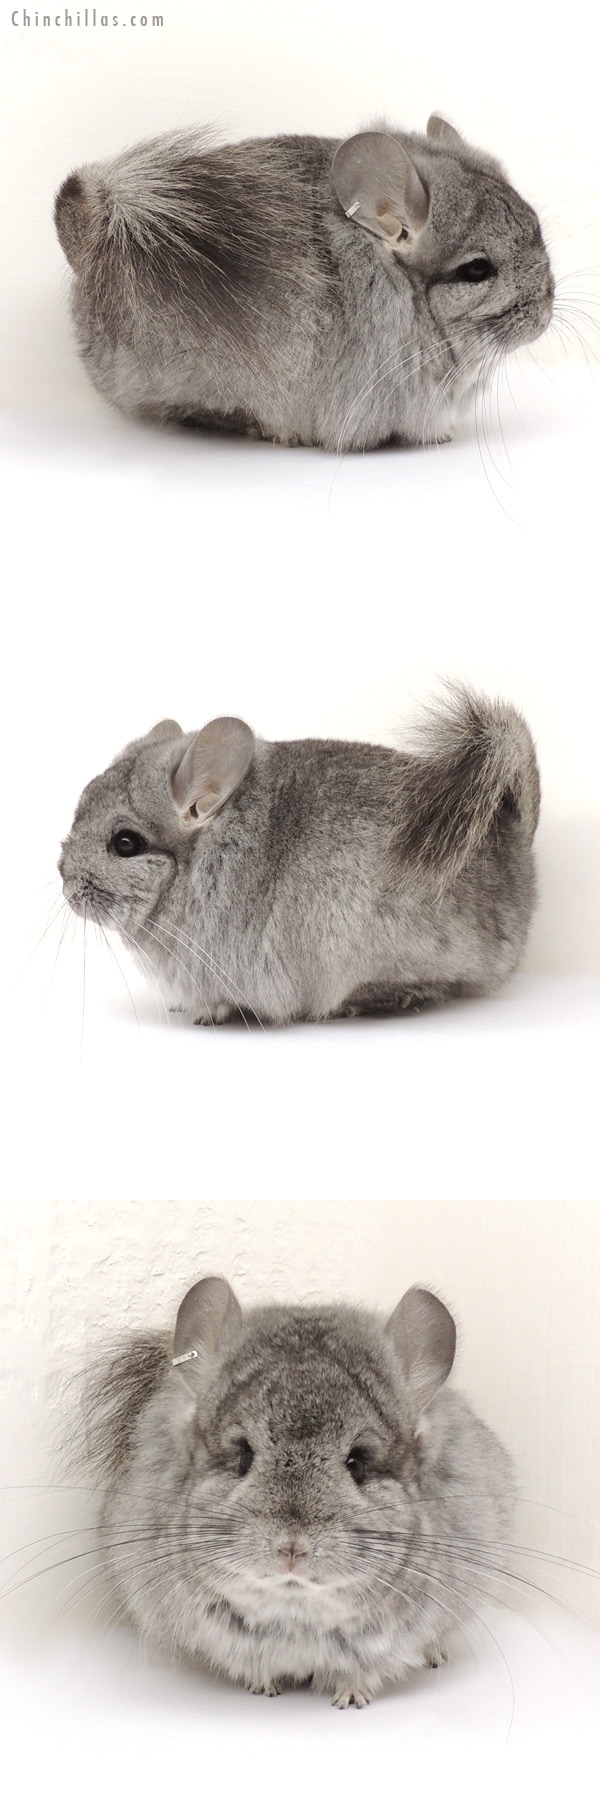 Chinchilla or related item offered for sale or export on Chinchillas.com - 14020 Exceptional Standard Royal Persian Angora Female Chinchilla